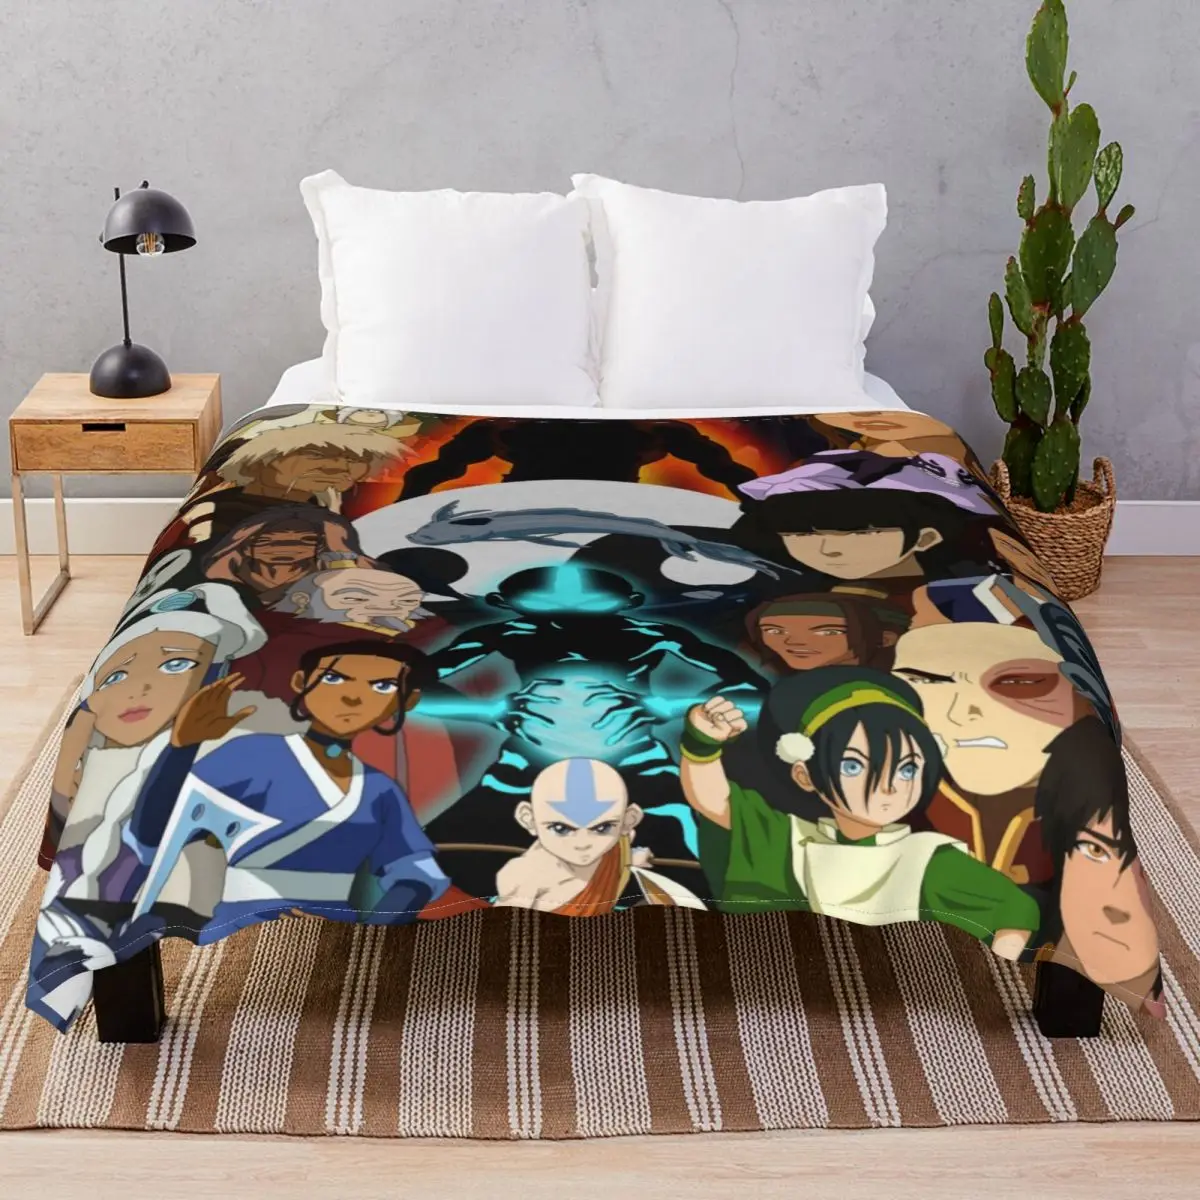 The World Of Avatar Blanket Flannel Plush Print Super Soft Throw Blankets for Bedding Sofa Camp Office